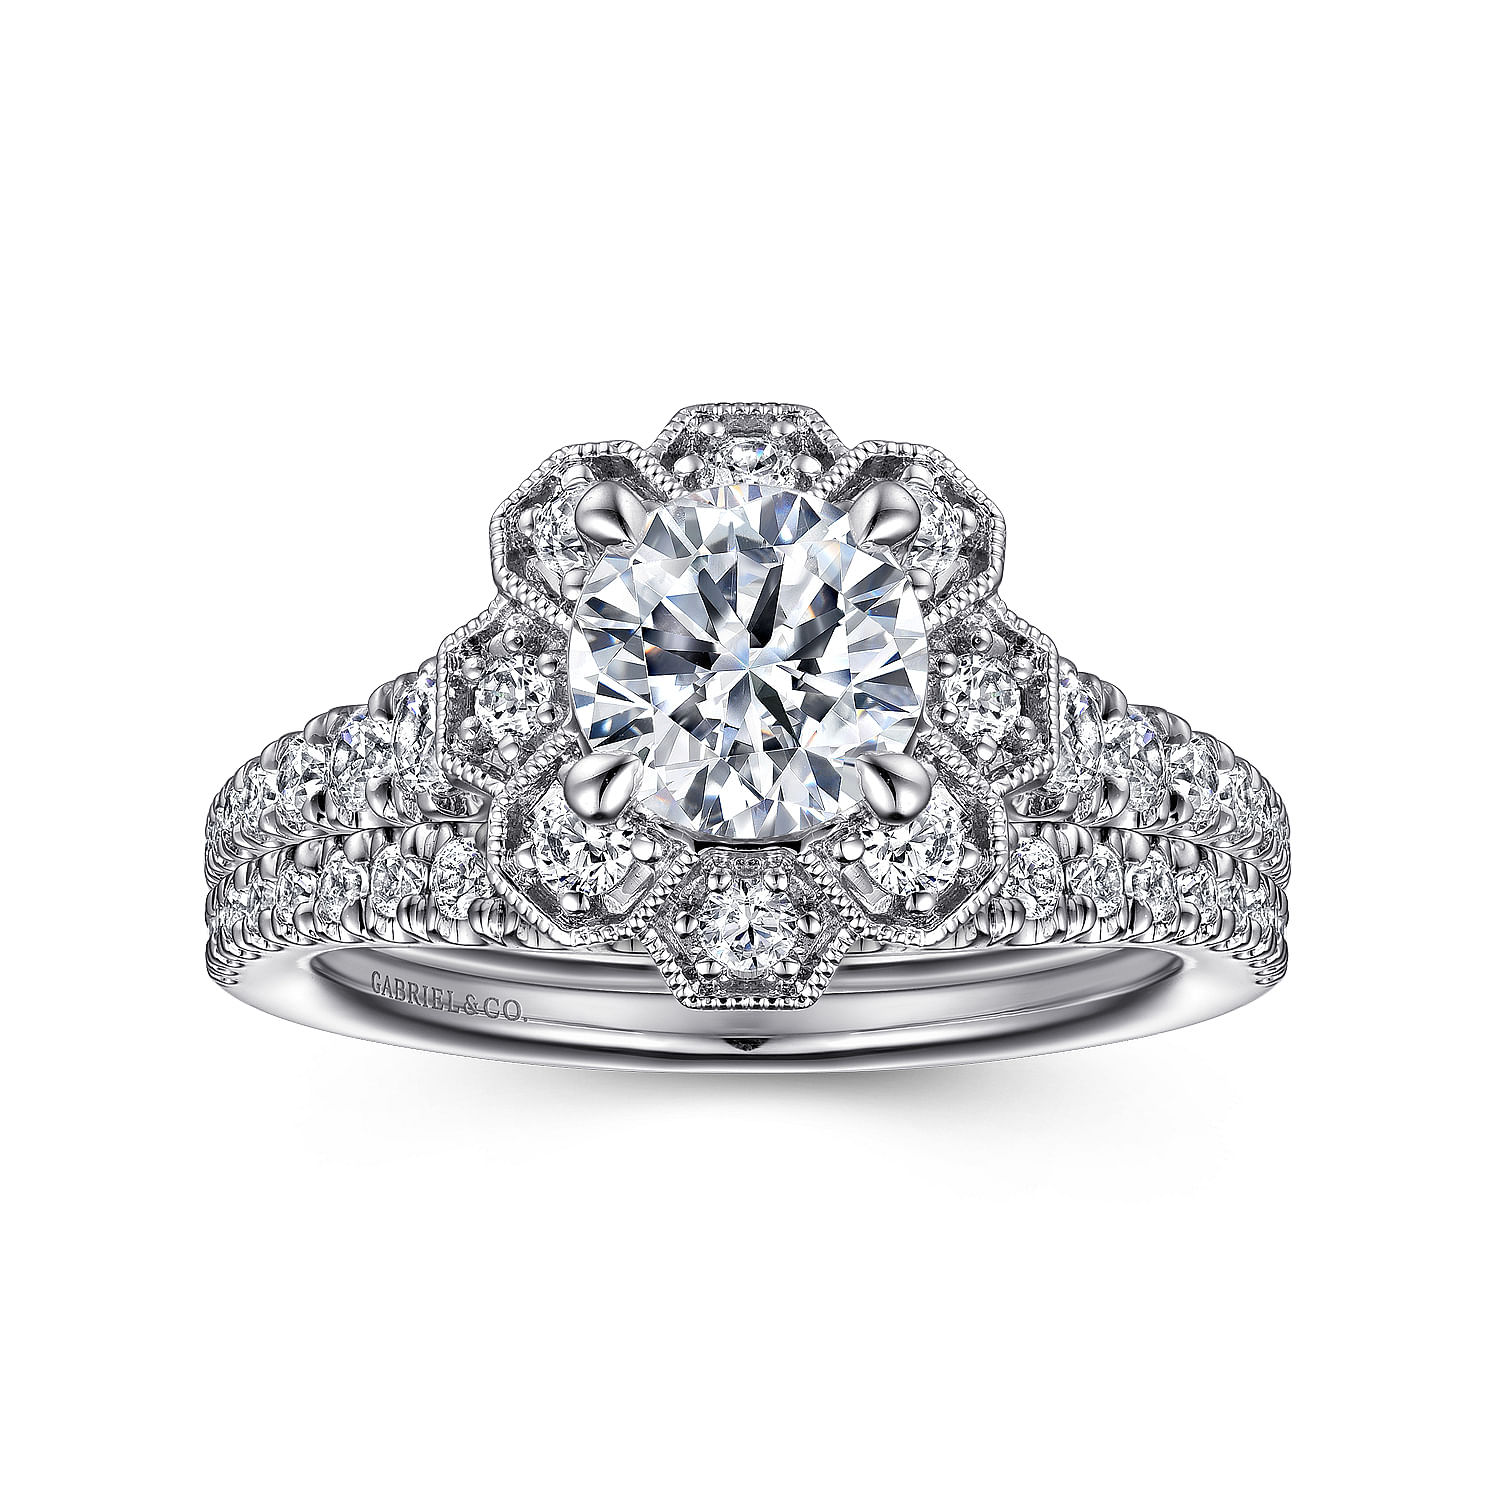 Art Deco Inspired 14K White Gold Floral Halo Round Diamond Engagement Ring